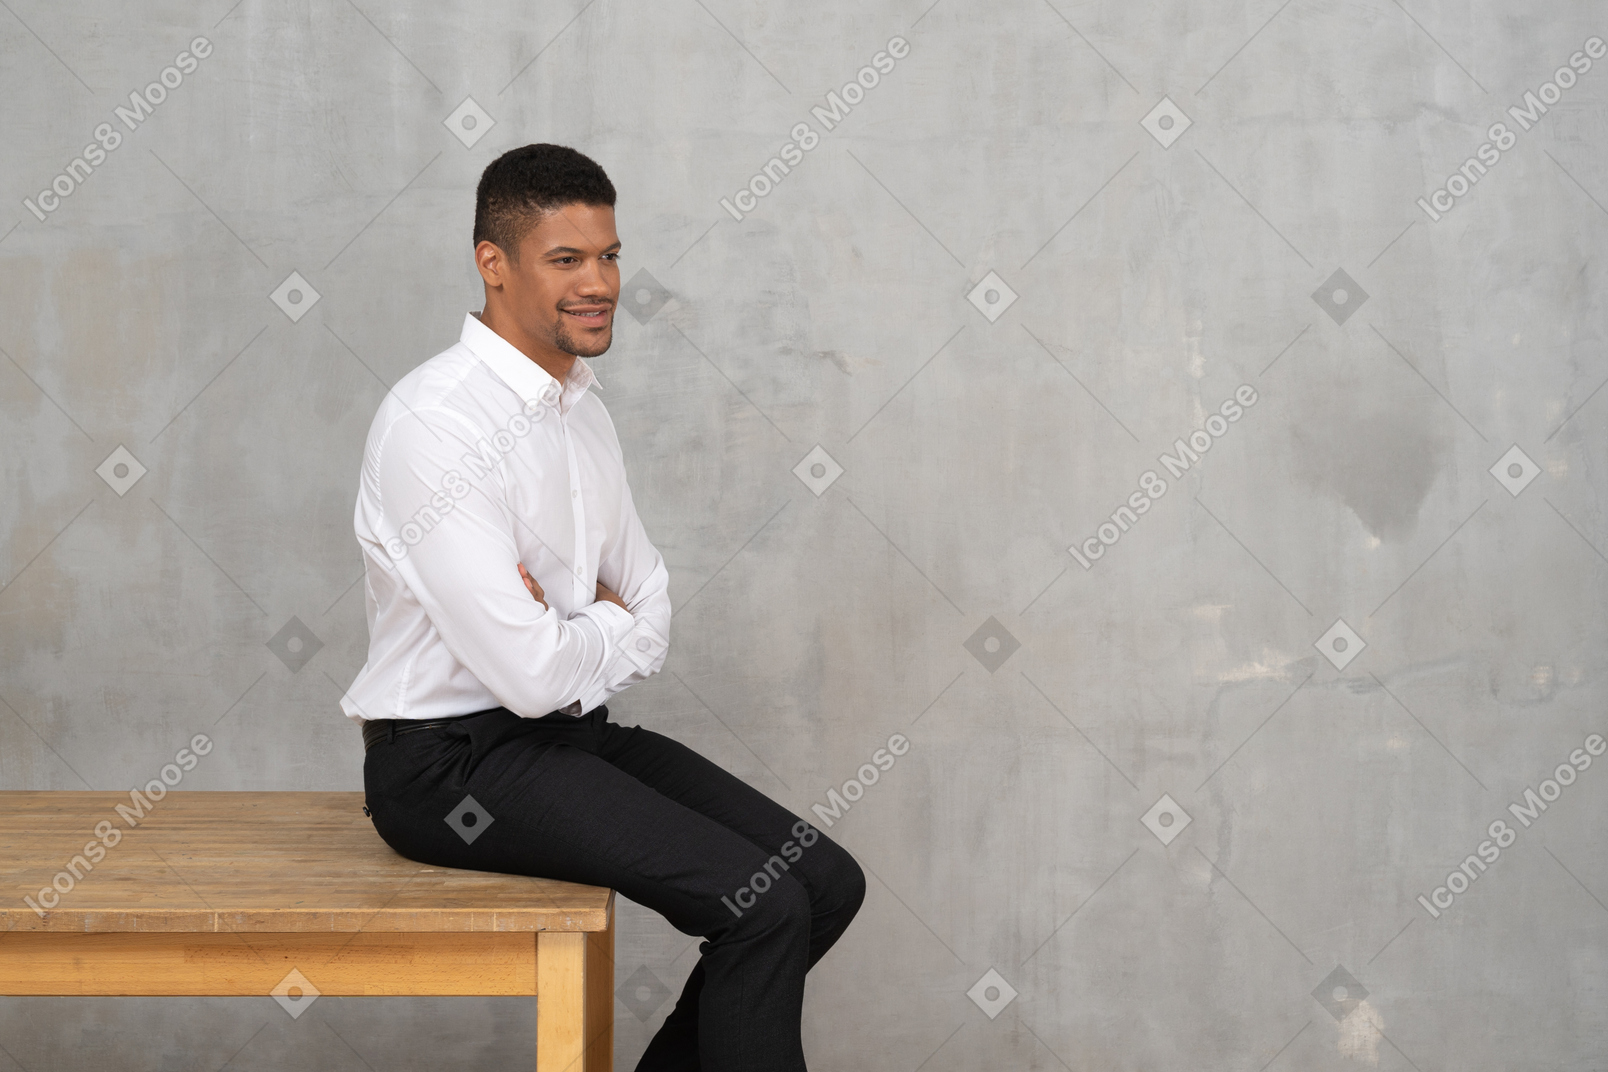 Smiling man in office clothes sitting on a table with his arms crossed